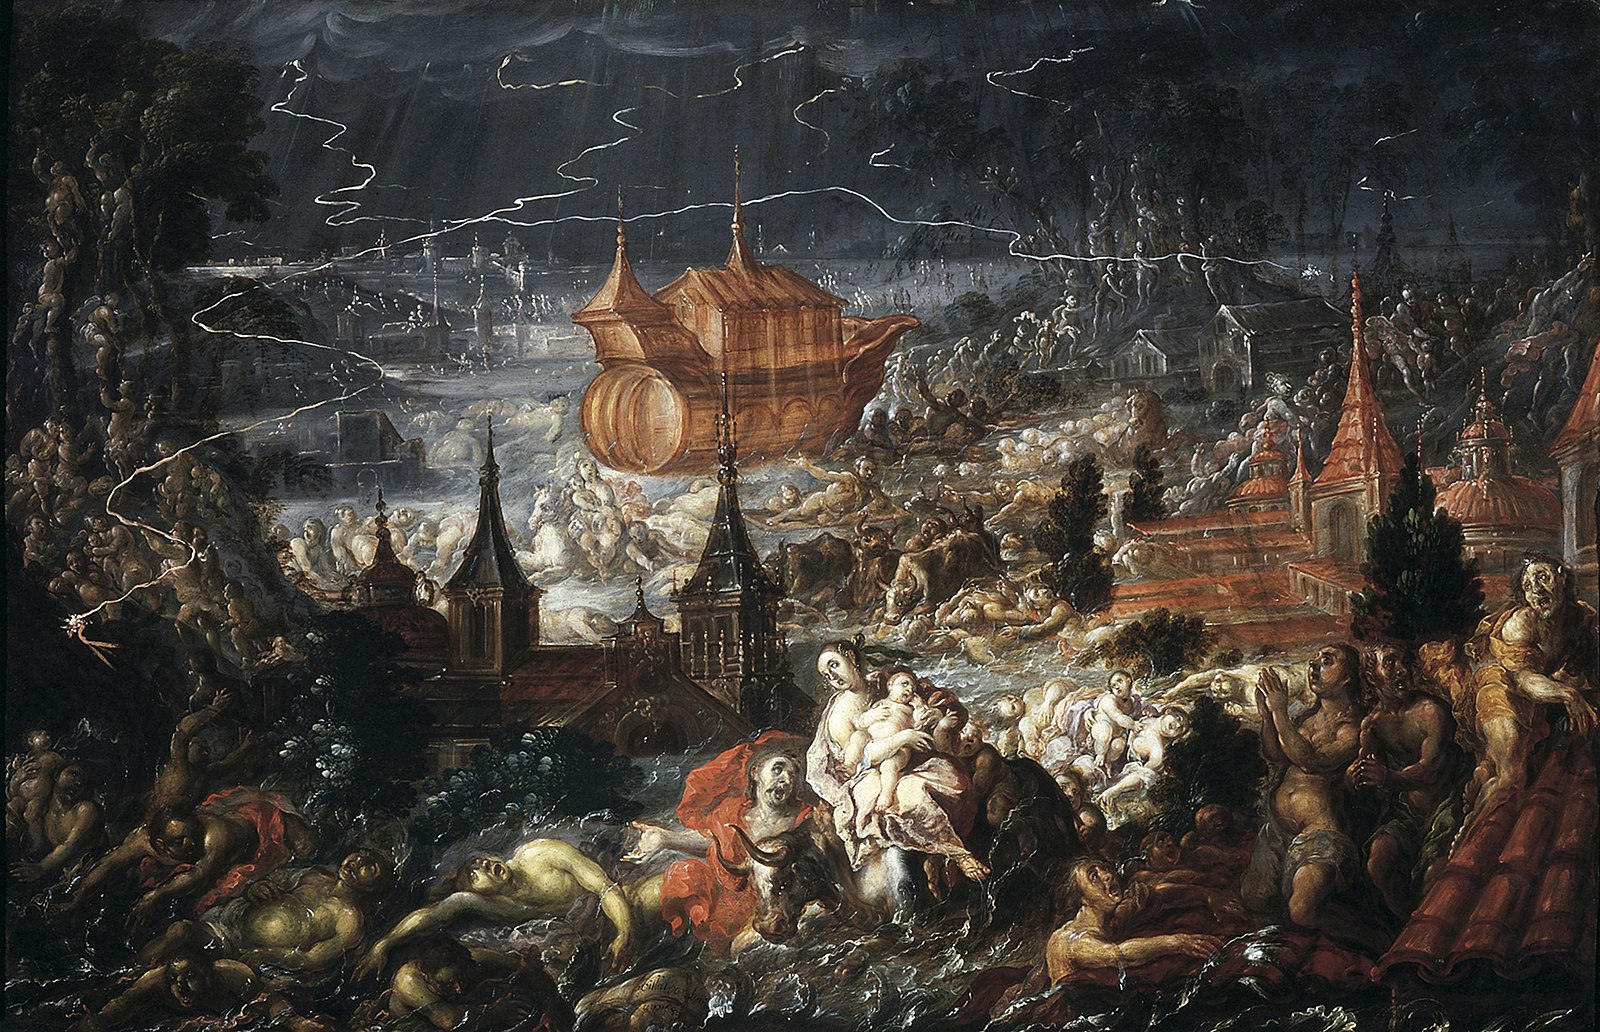 A dark scene at night with a boat and storm waters and people drowning